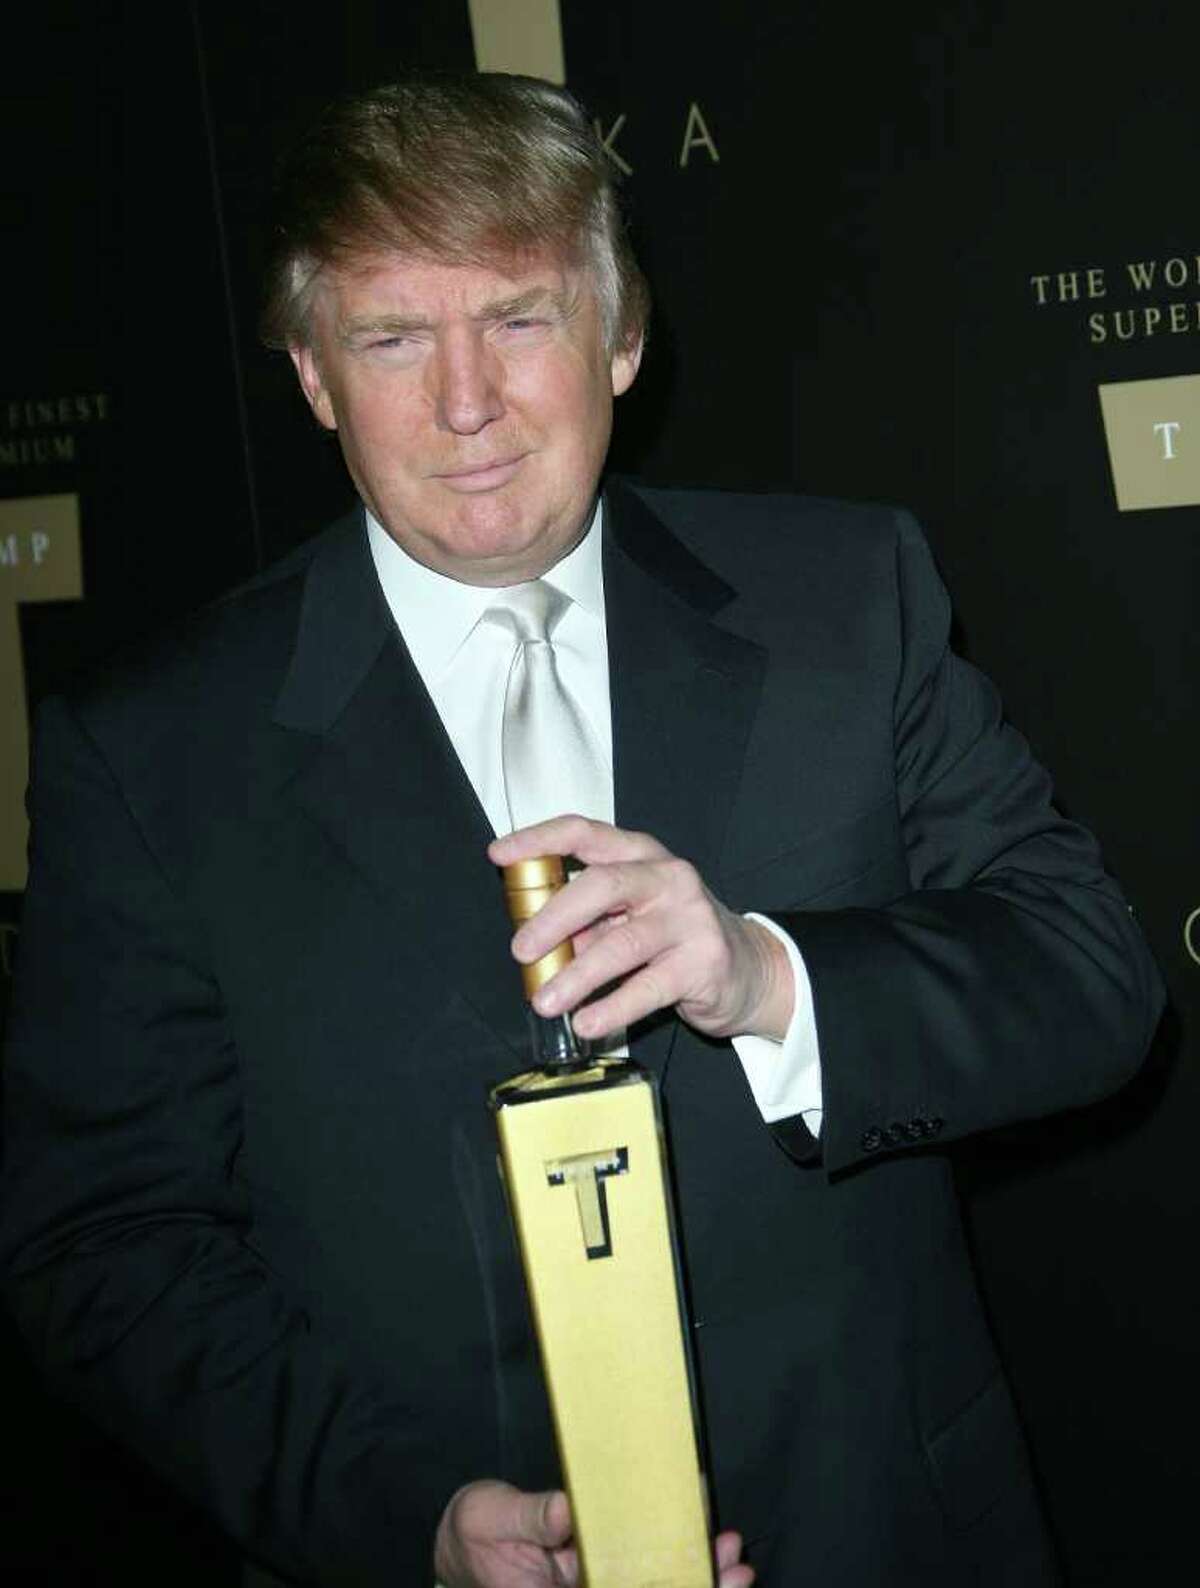 Donald Trump has had many (often failed) business ventures. Click ahead to read about some of the most noteworthy. Despite being an avowed teetotaller, Trump once sold his own vodka called, surprise, Trump Vodka. Trump Vodka billed itself as “success distilled” (results may vary drinking Trump’s distilled success) and cost $33 a bottle. Despite Trump’s boast that the “Trump and Tonic” would become America’s cocktail of choice, the vodka never took off and was basically defunct by 2008. 